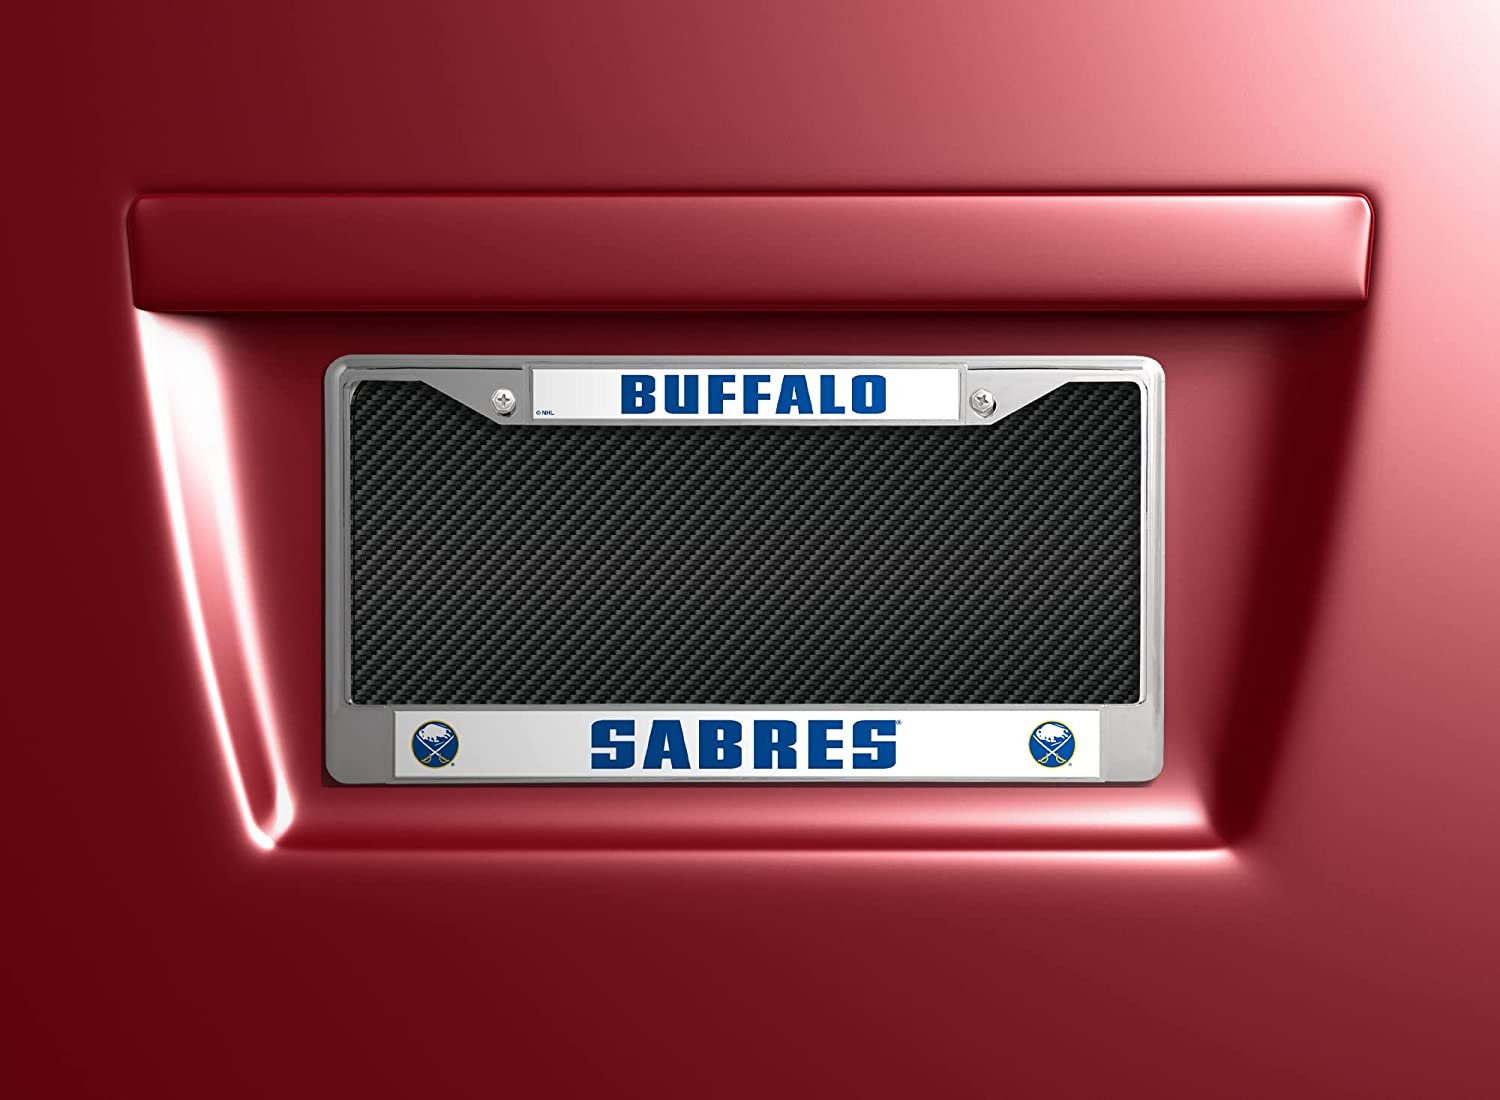 Buffalo Sabres Metal License Plate Frame Chrome Tag Cover 6x12 Inch